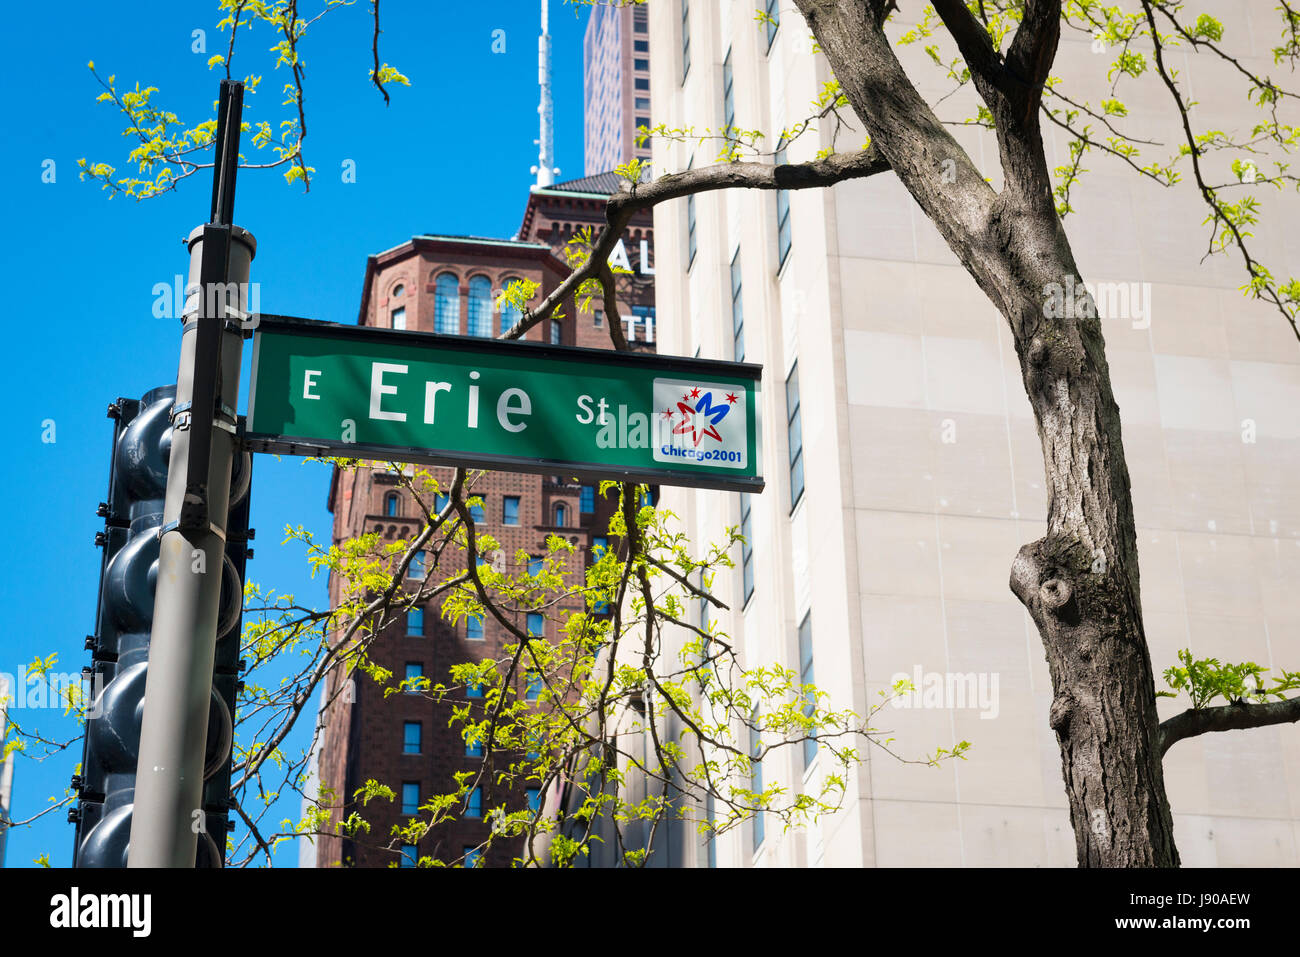 Chicago Illinois Near North Side Magnificent Mile N Michigan Avenue E Erie St street scene street sign tree trees traffic lights signal blue sky Stock Photo